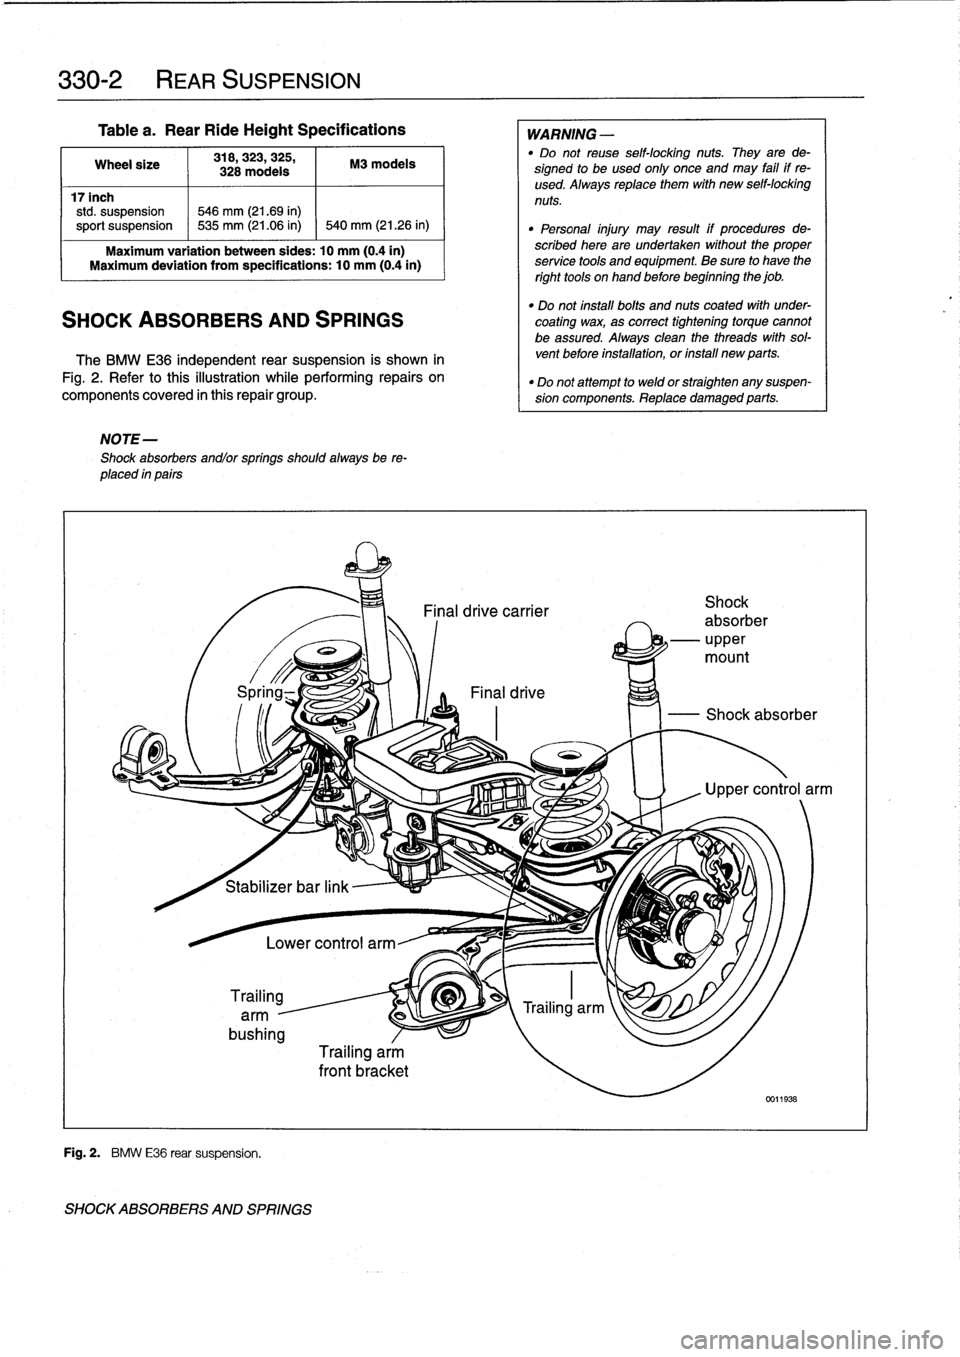 BMW 323i 1997 E36 Workshop Manual 
330-2

	

REAR
SUSPENSION

Table
a
.
Rear
RideHeight
Specifications

Wheel
size

	

318,323,
325,

	

M3
modeis
328
modeis

17inch
std
.
suspension

	

546
mm
(21.69
in)
sport
suspension

	

~
535
mm